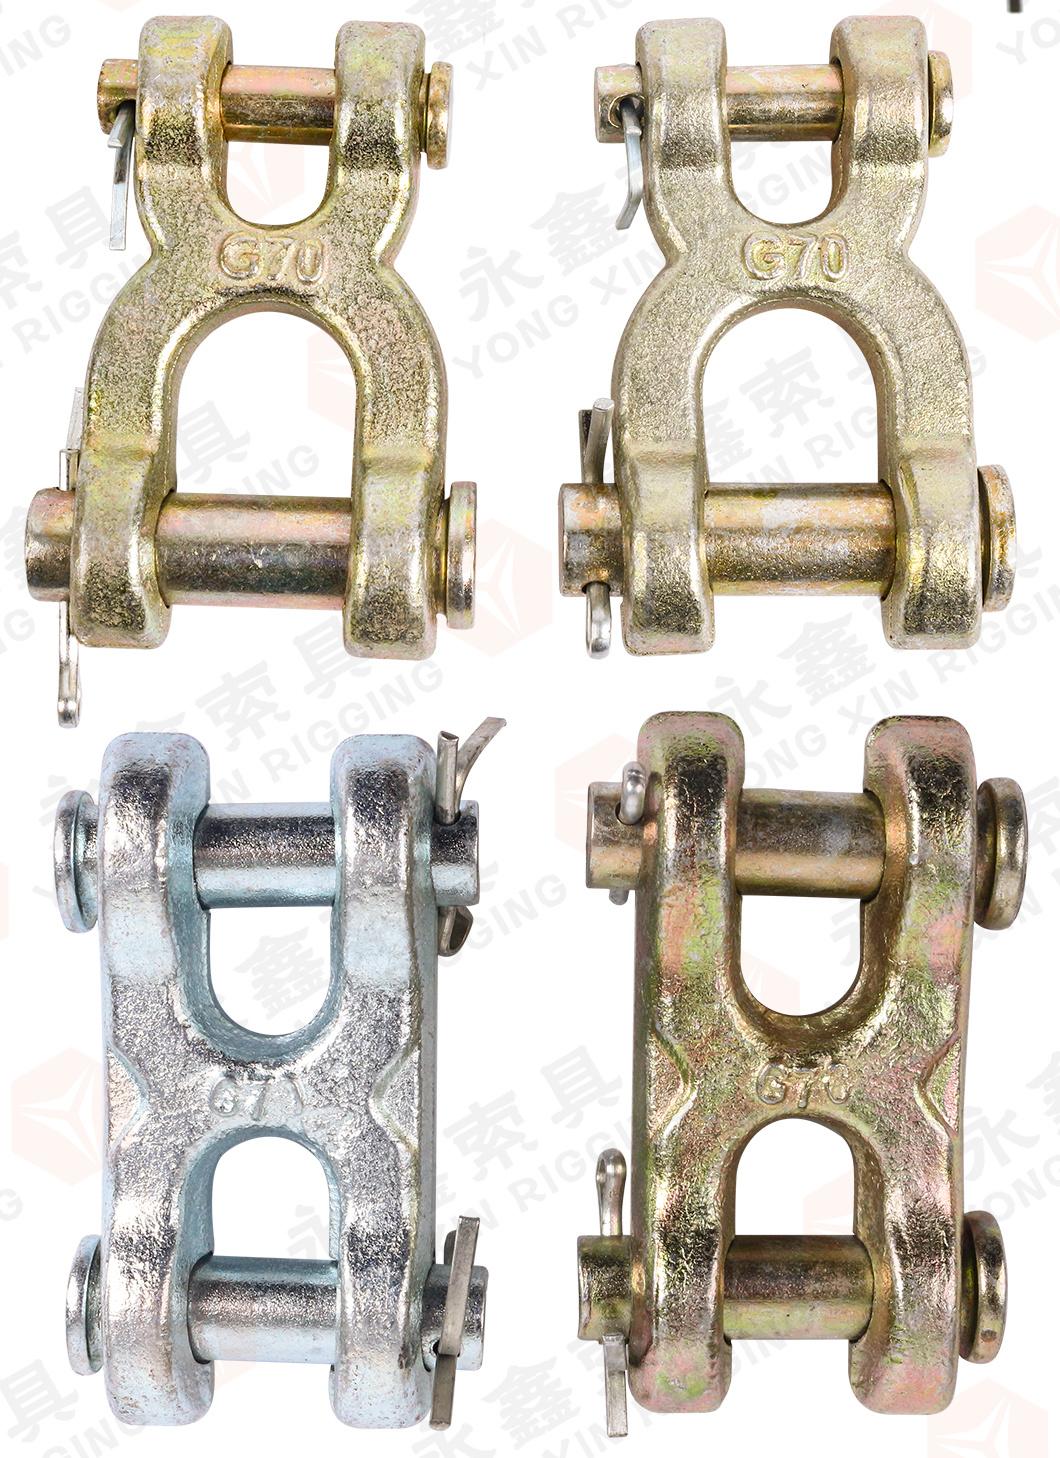 New Arrival Forged Chain Fitting H-Type Connecting Double Twin Clevis Links S Rigging Hardware